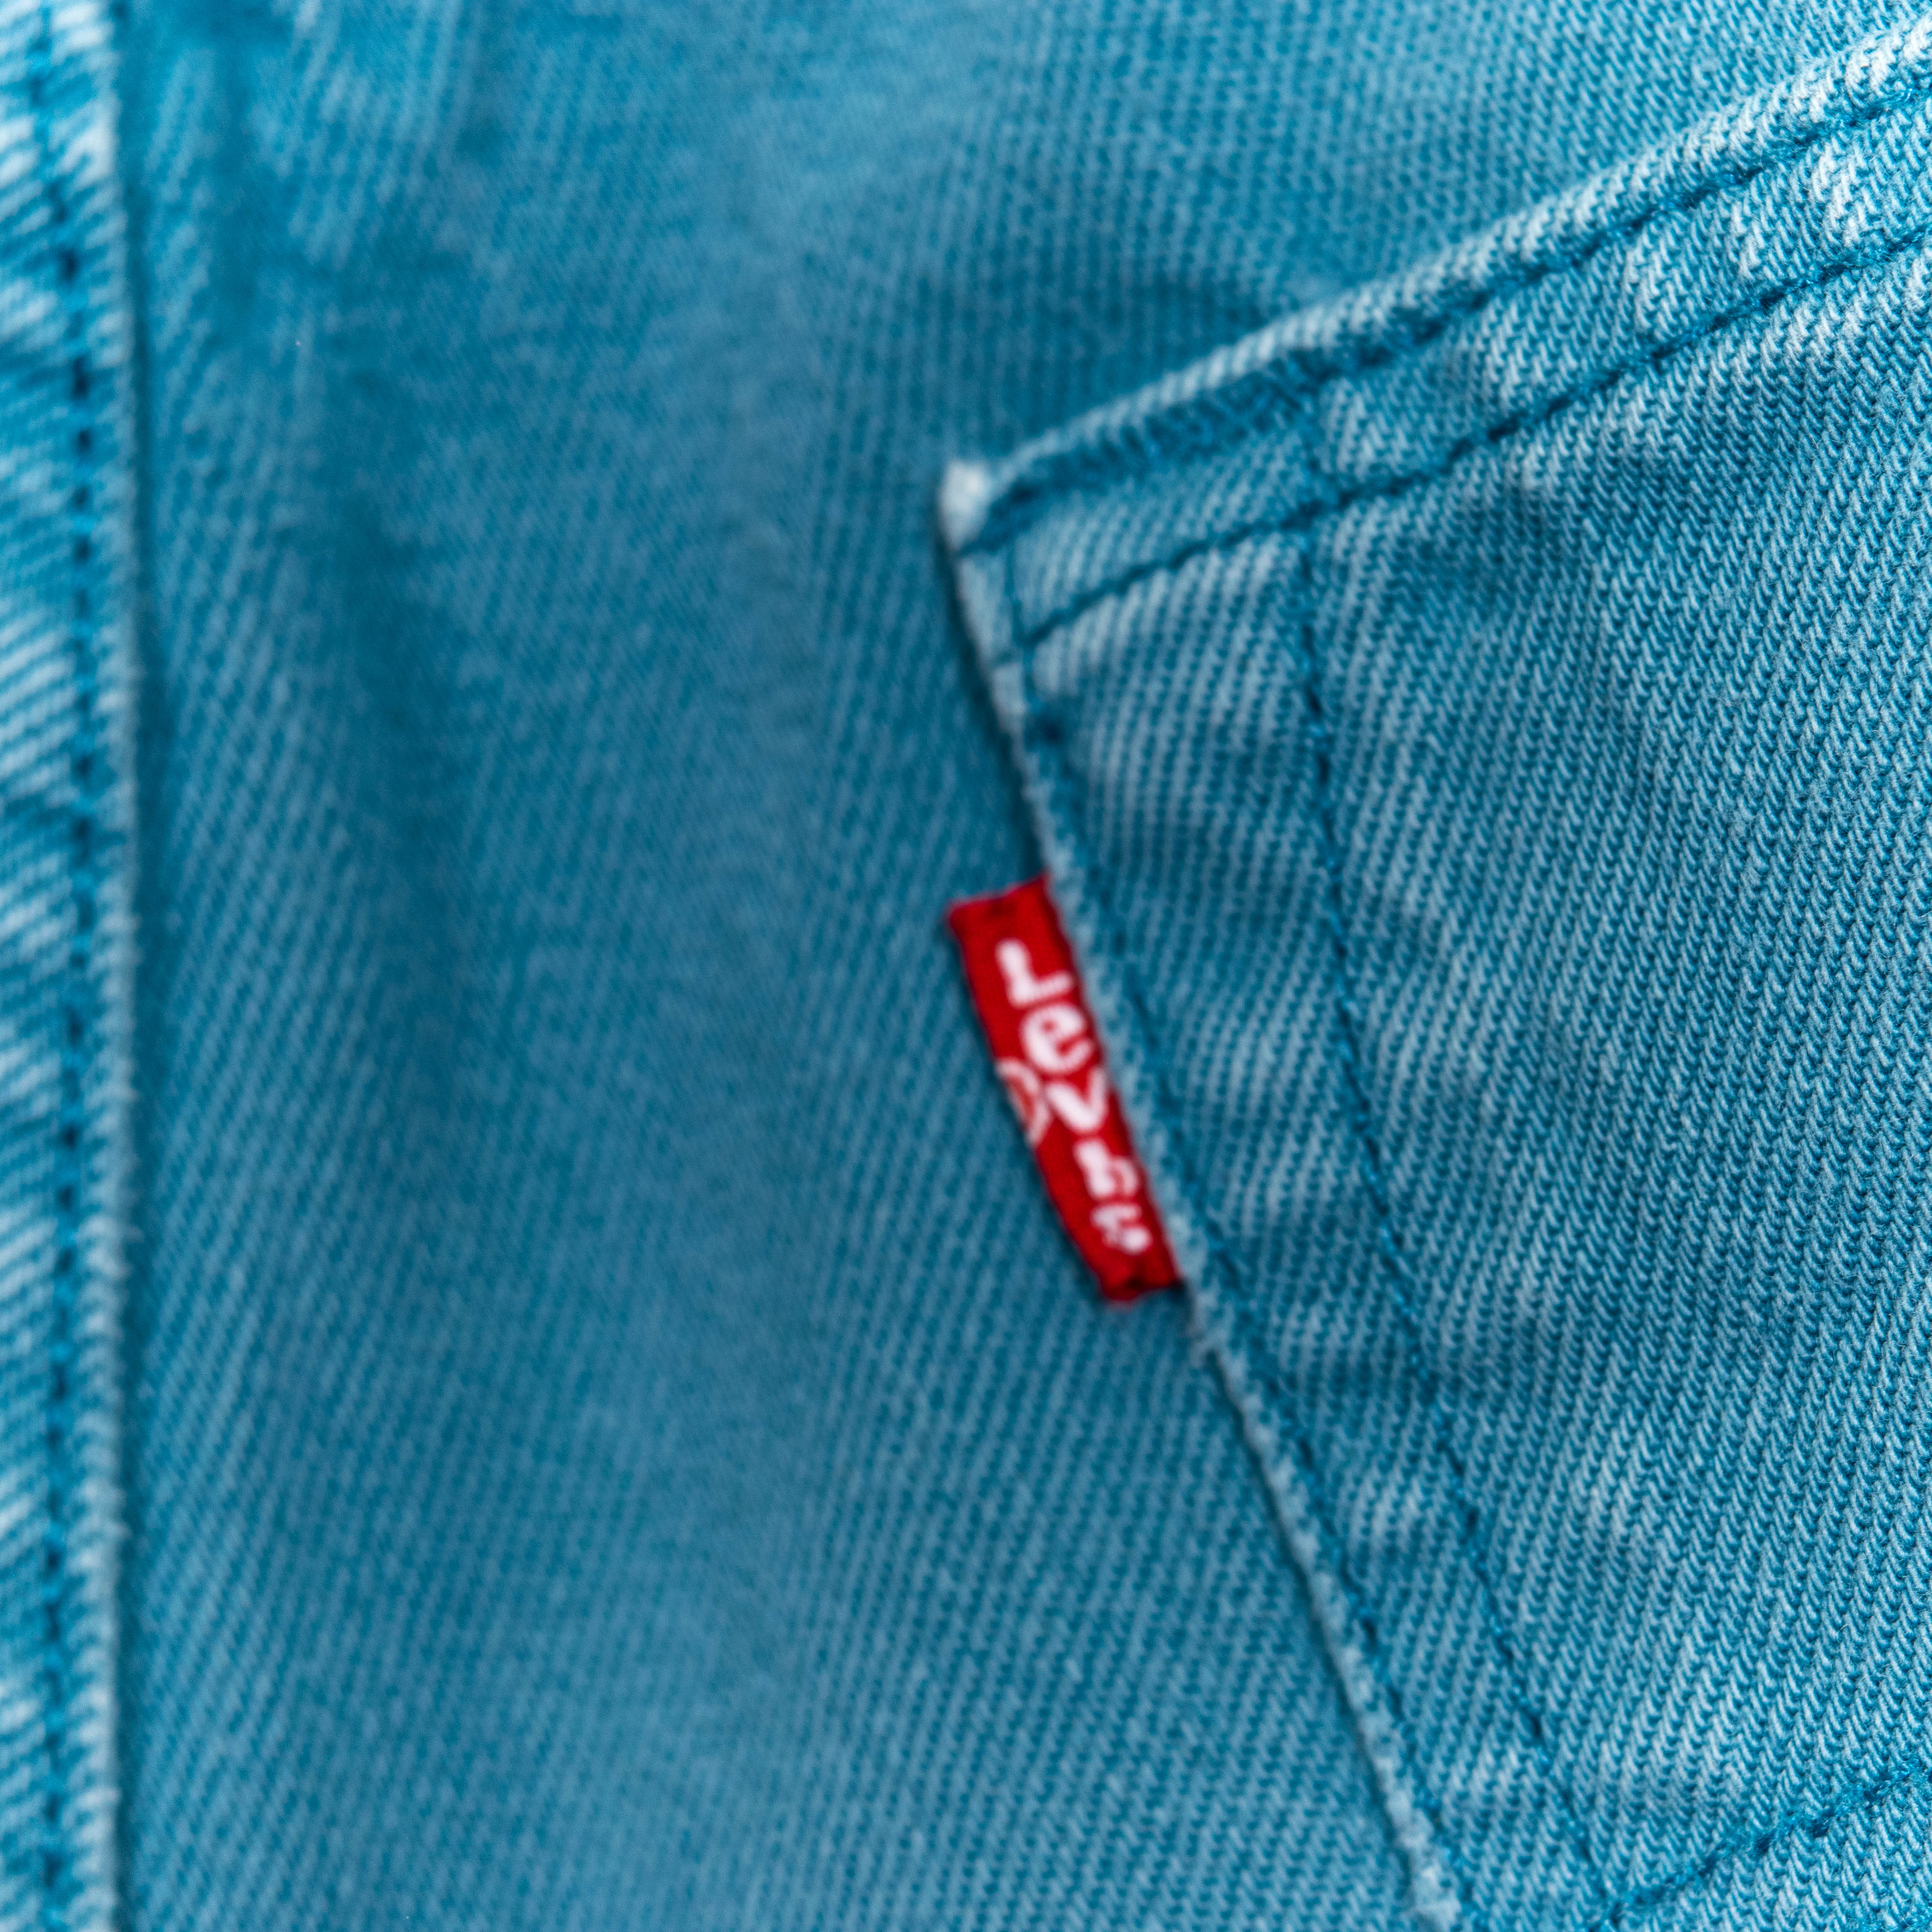 Levis 501 Blue Straight Fit Button Fly Jeans Mens US31